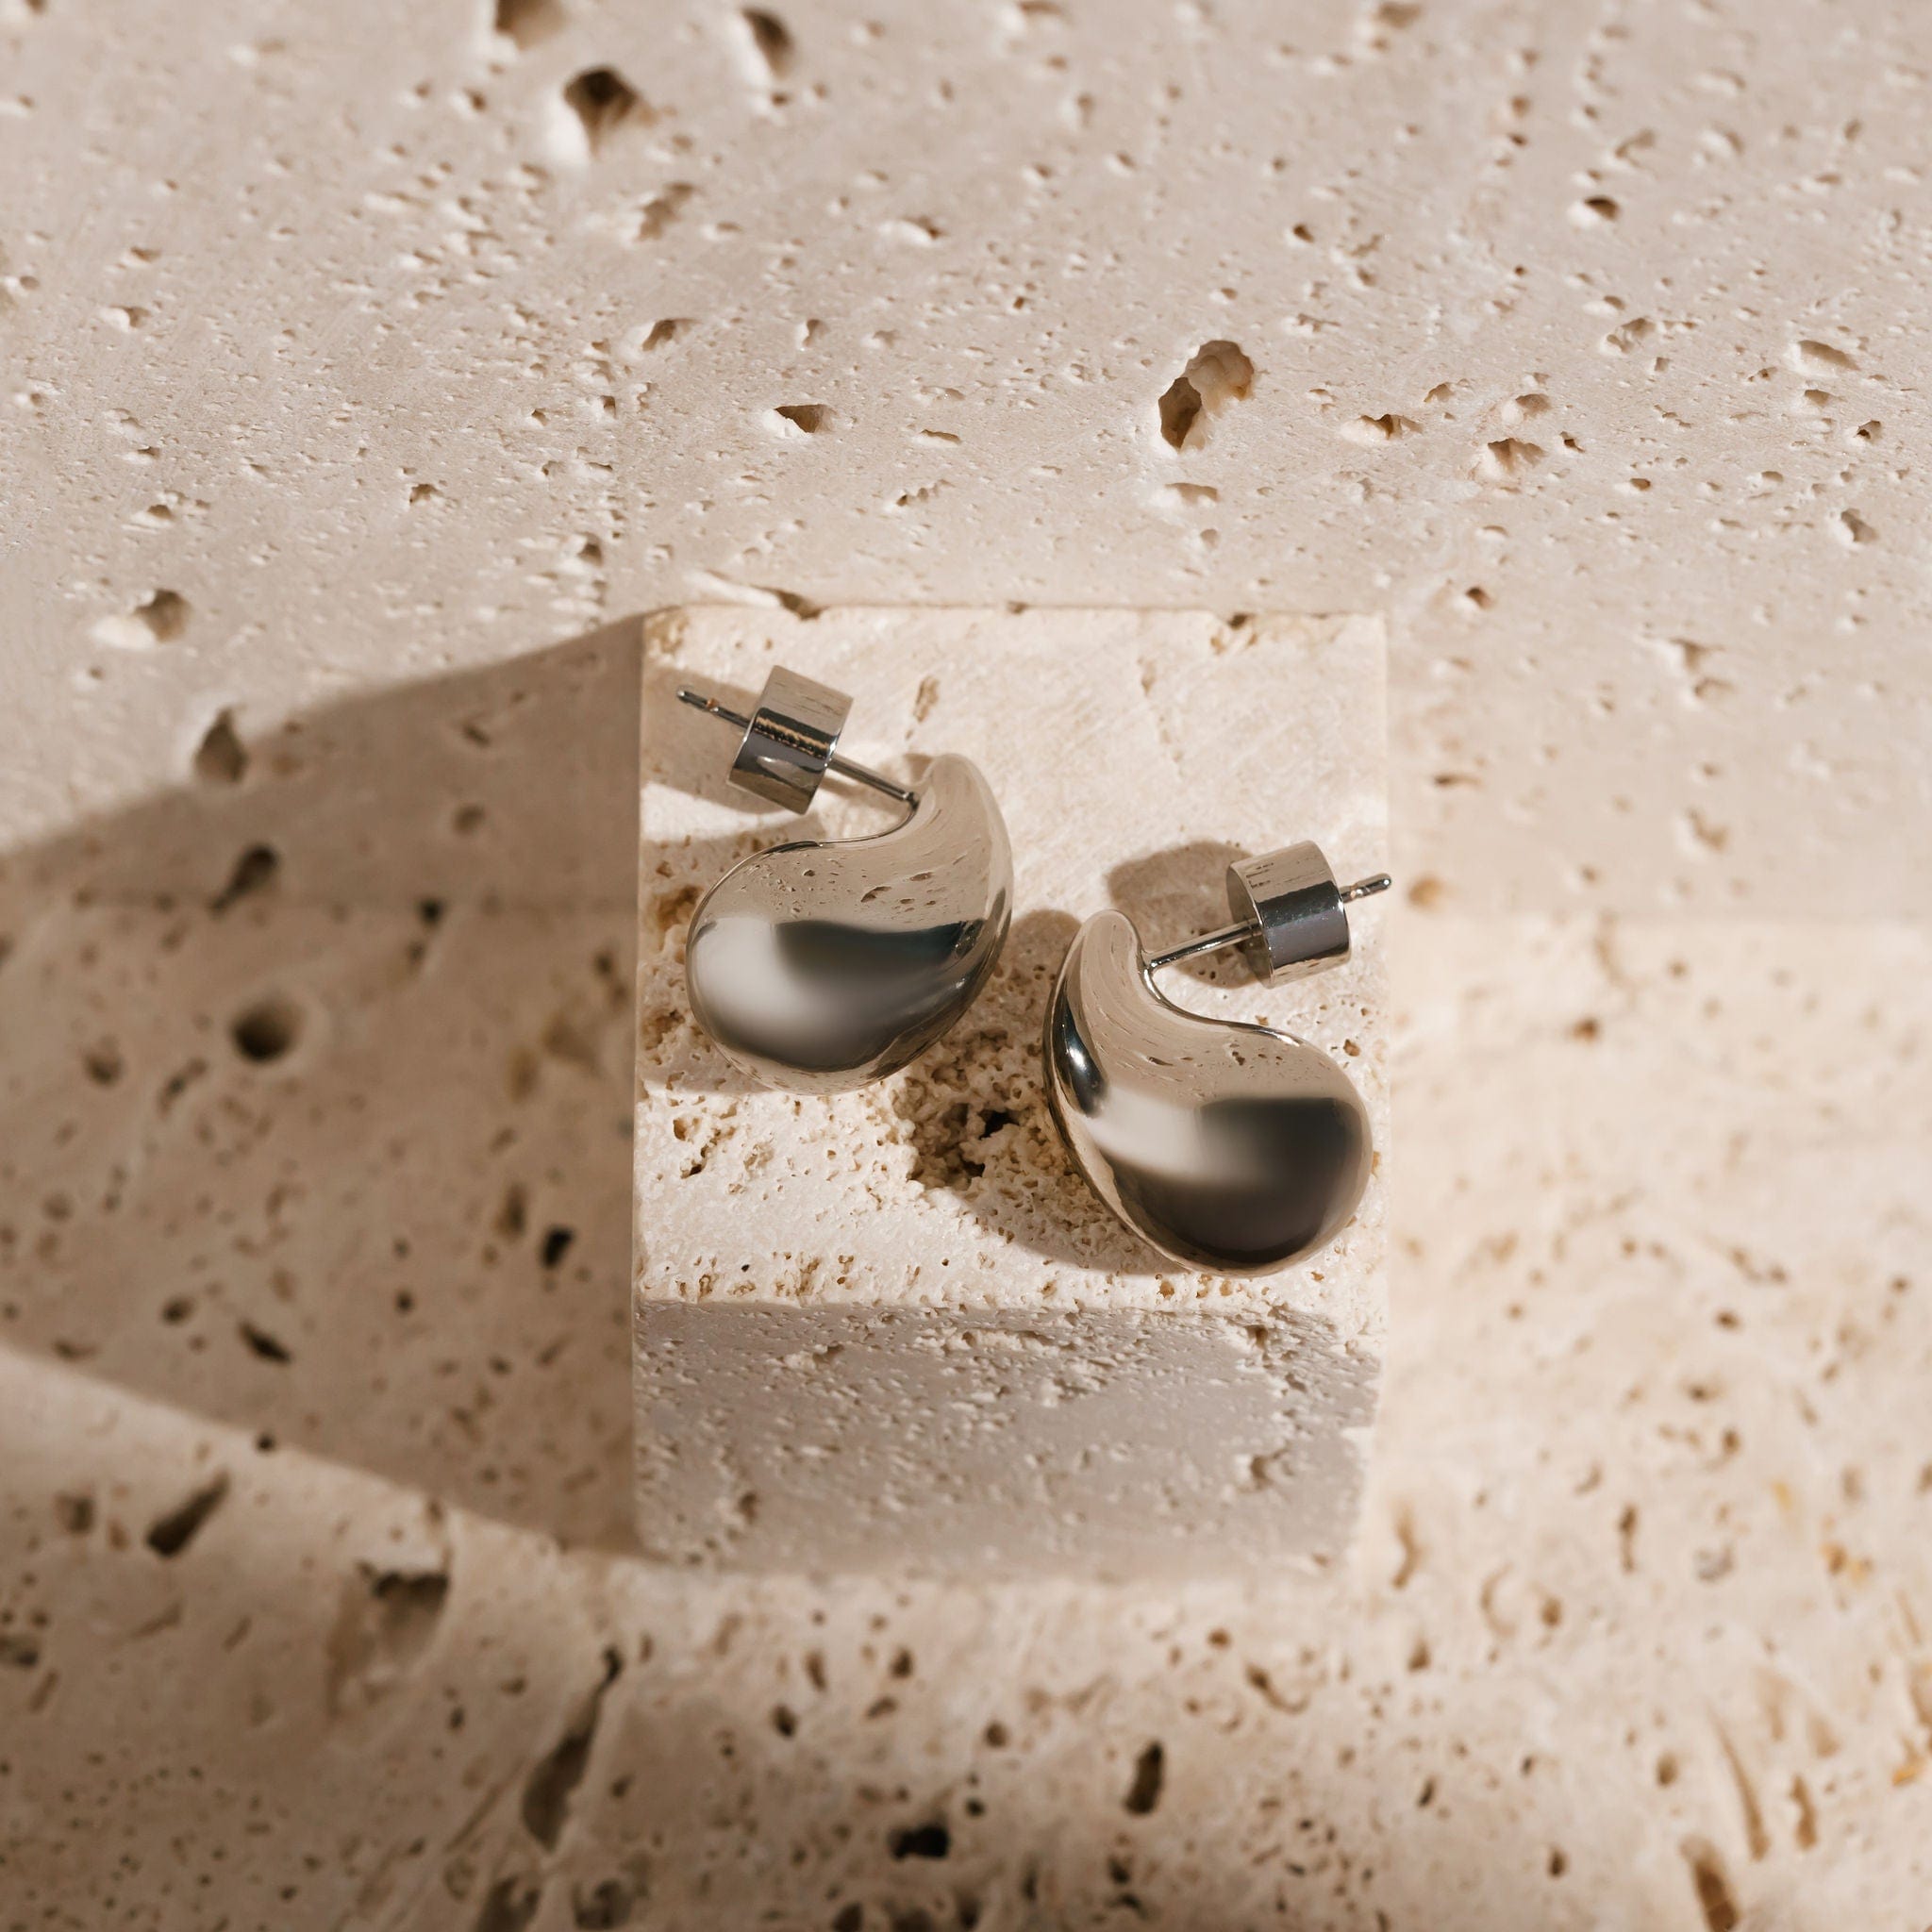 A pair of platinum Moda Hoop Mini earrings is displayed on a porous stone block, showing off the teardrop-shaped open hoop design and the cylindrical push-back closures. 